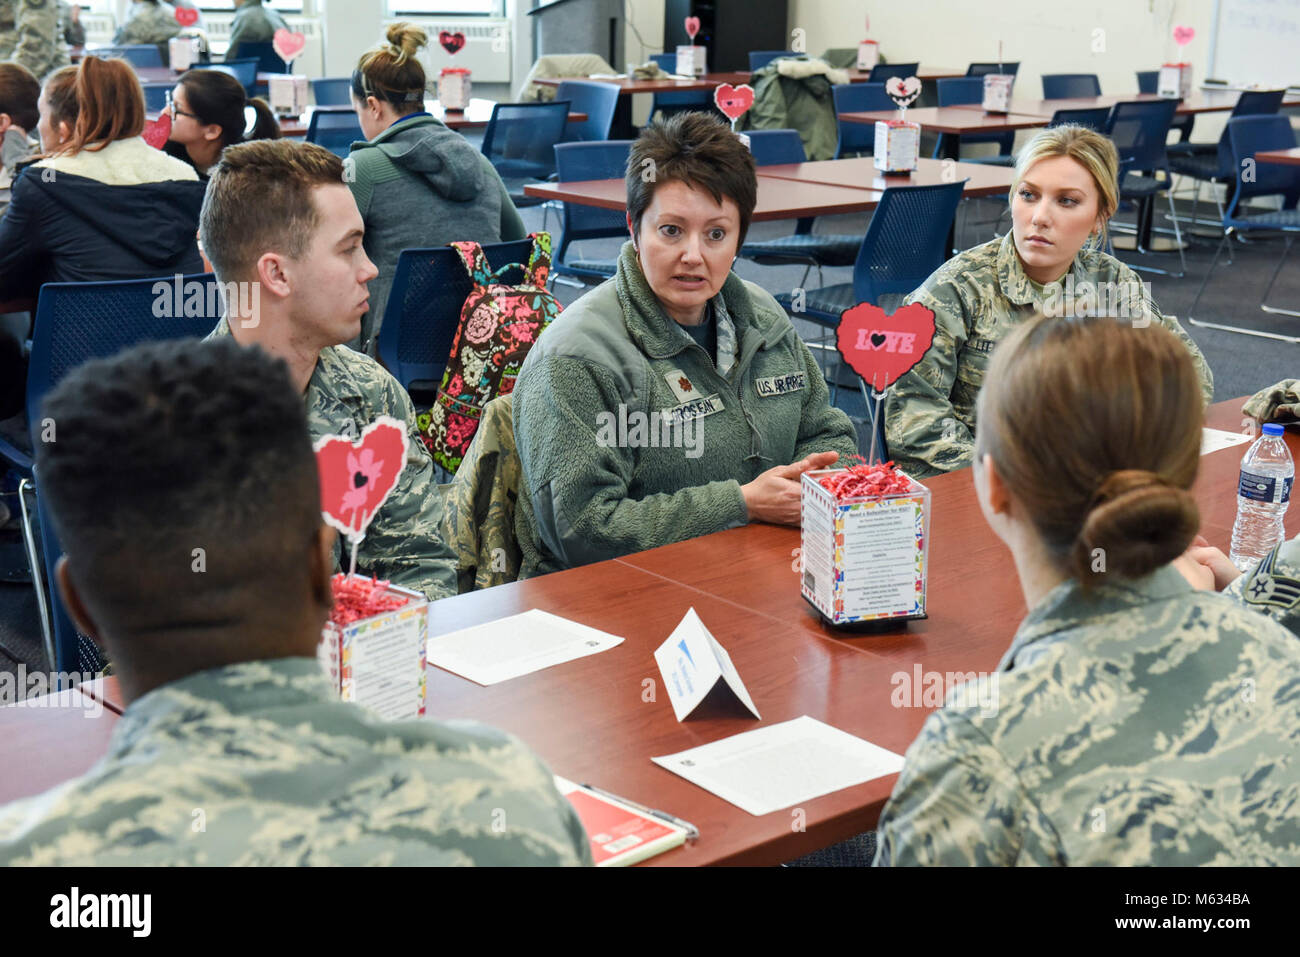 Maj. Melanie Grosjean, commander of the Logistics Readiness Squadron at the 180th Fighter Wing in Swanton, Ohio, speaks to junior Airman at the speed mentorship event on February 10, 2018. Speed mentorship allows participants to network with mentors in various career fields and varying stages of military career development. Stock Photo